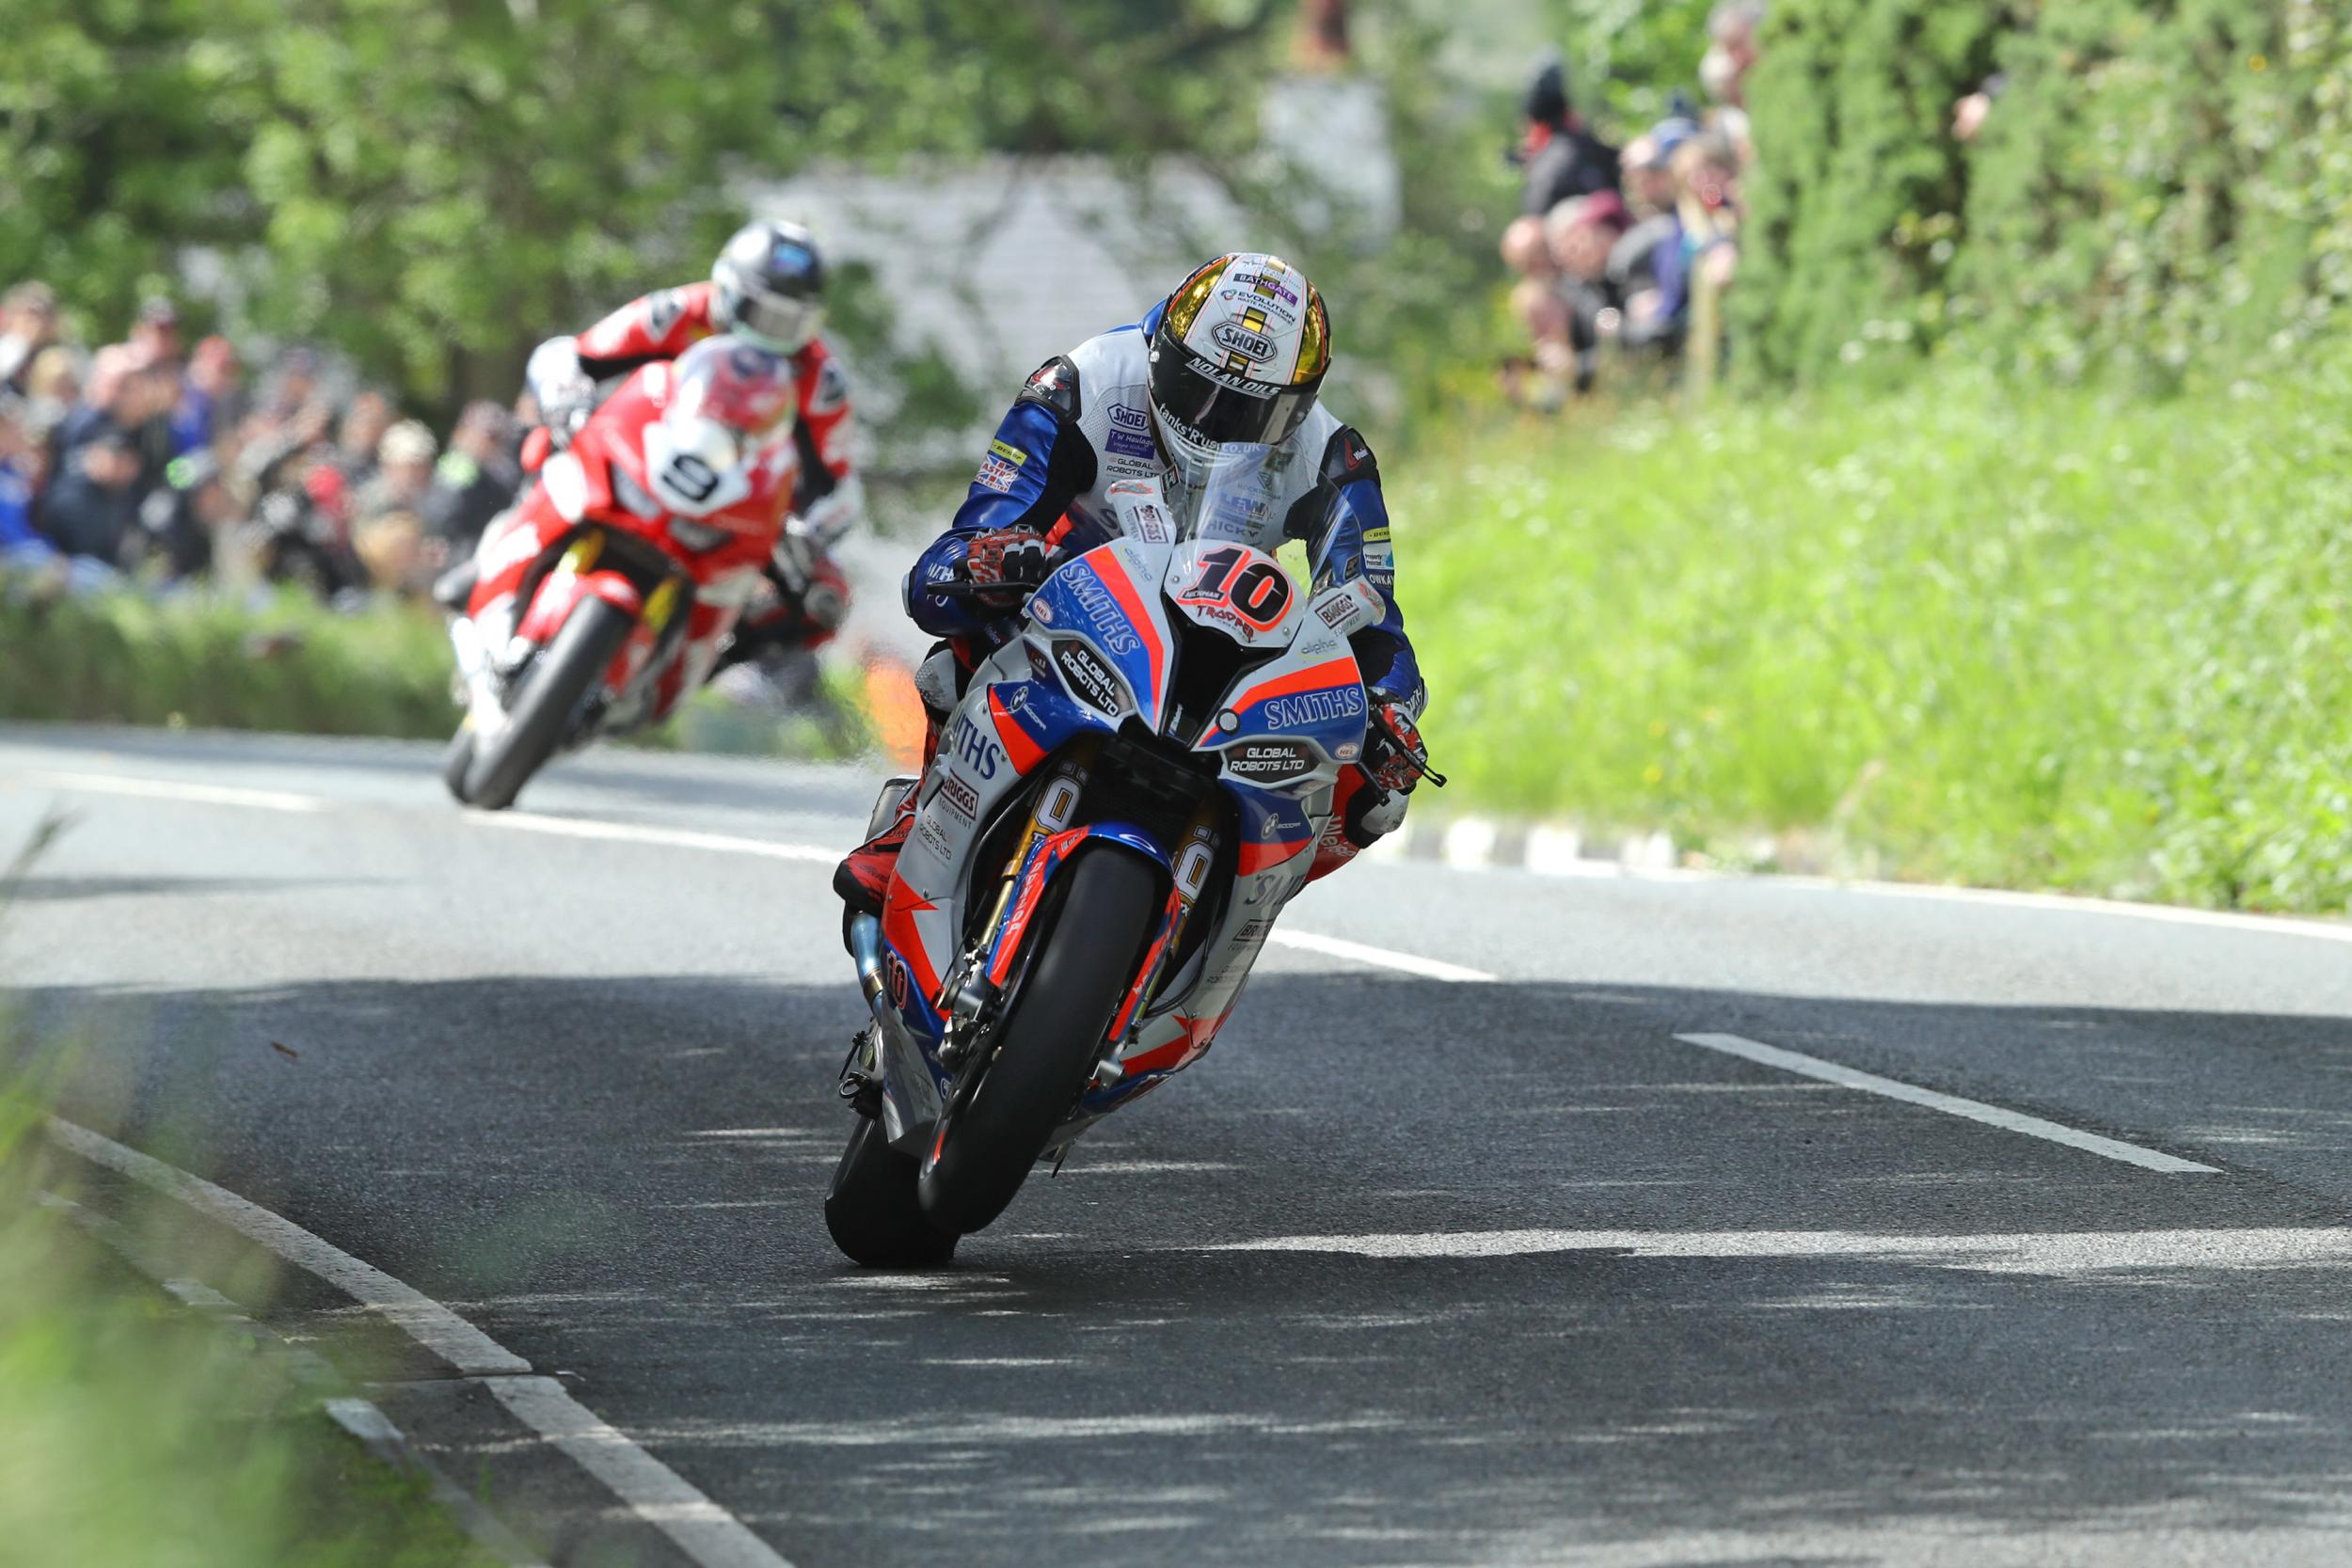 Isle of Man TT LIVE: Latest updates, stream, how to watch and schedule